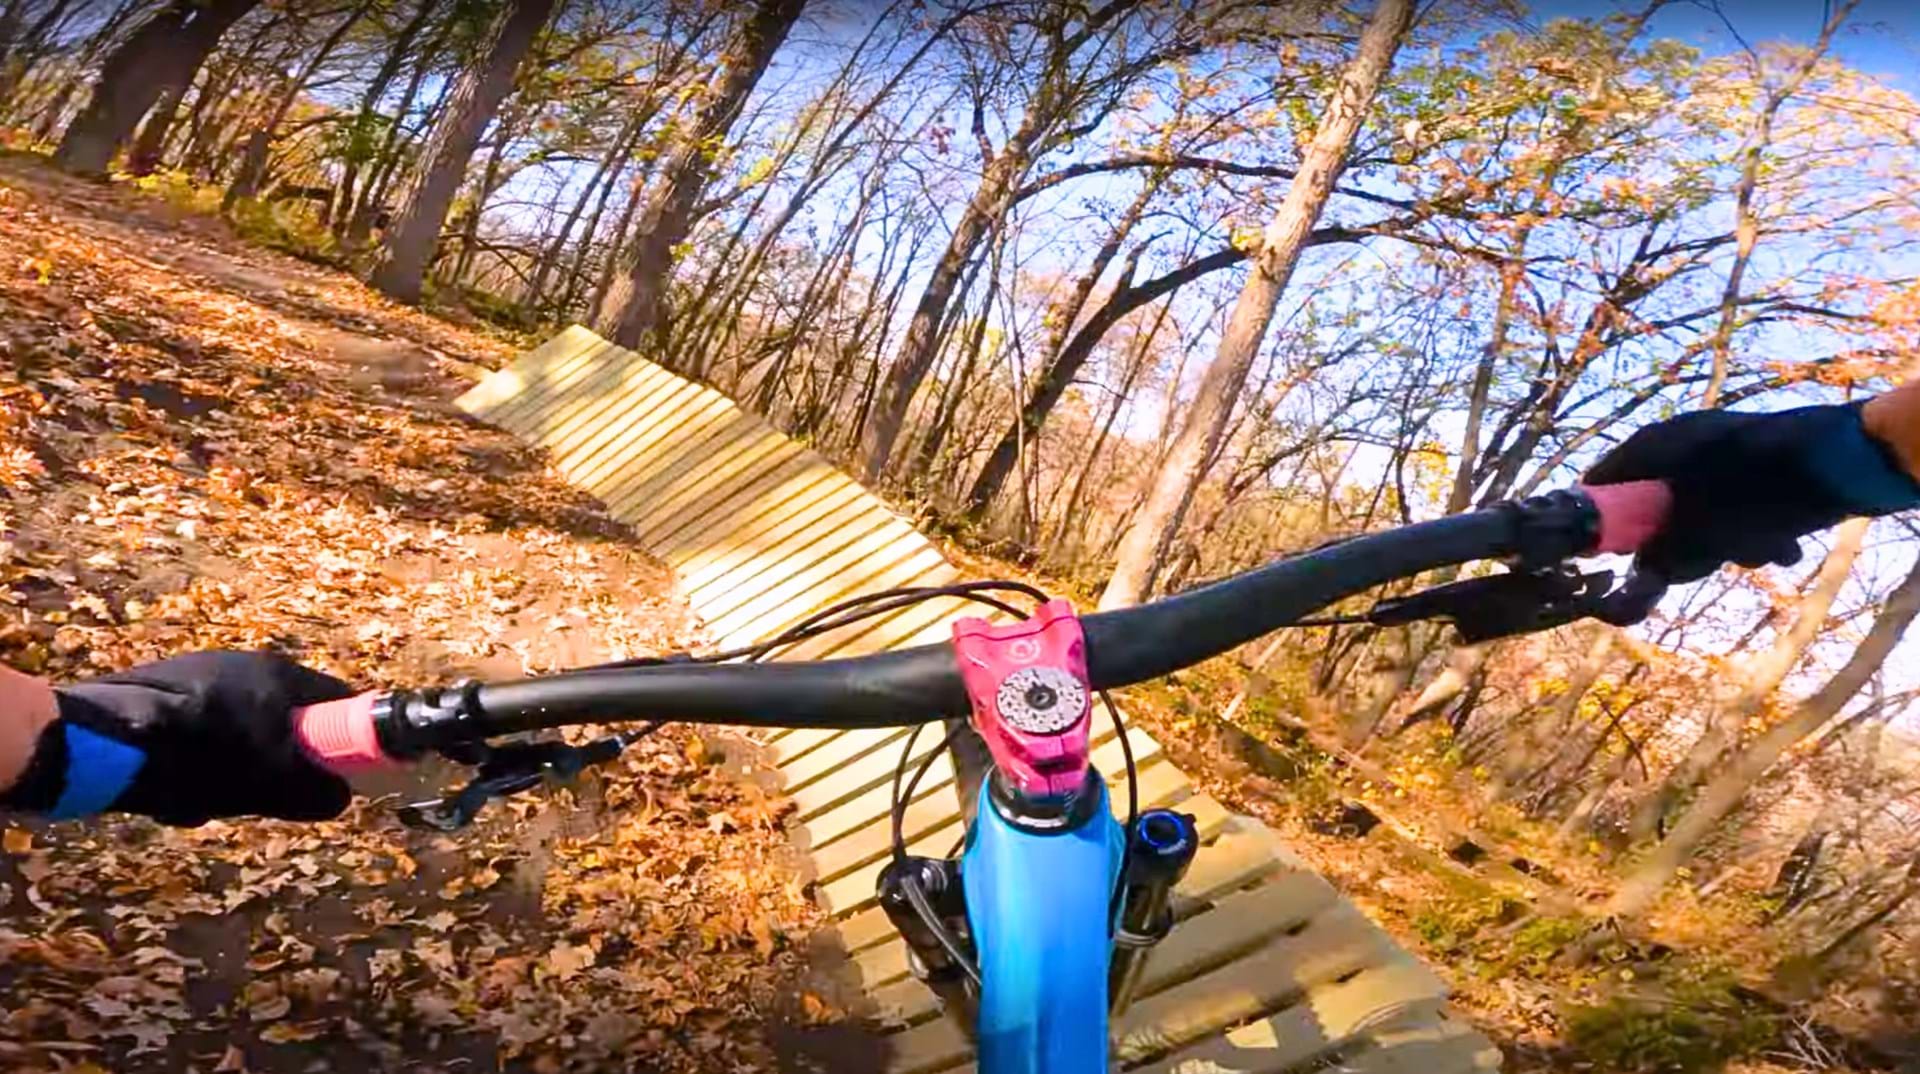 A surprising number of manmade elements add to the beauty and thrill of riding these trails.